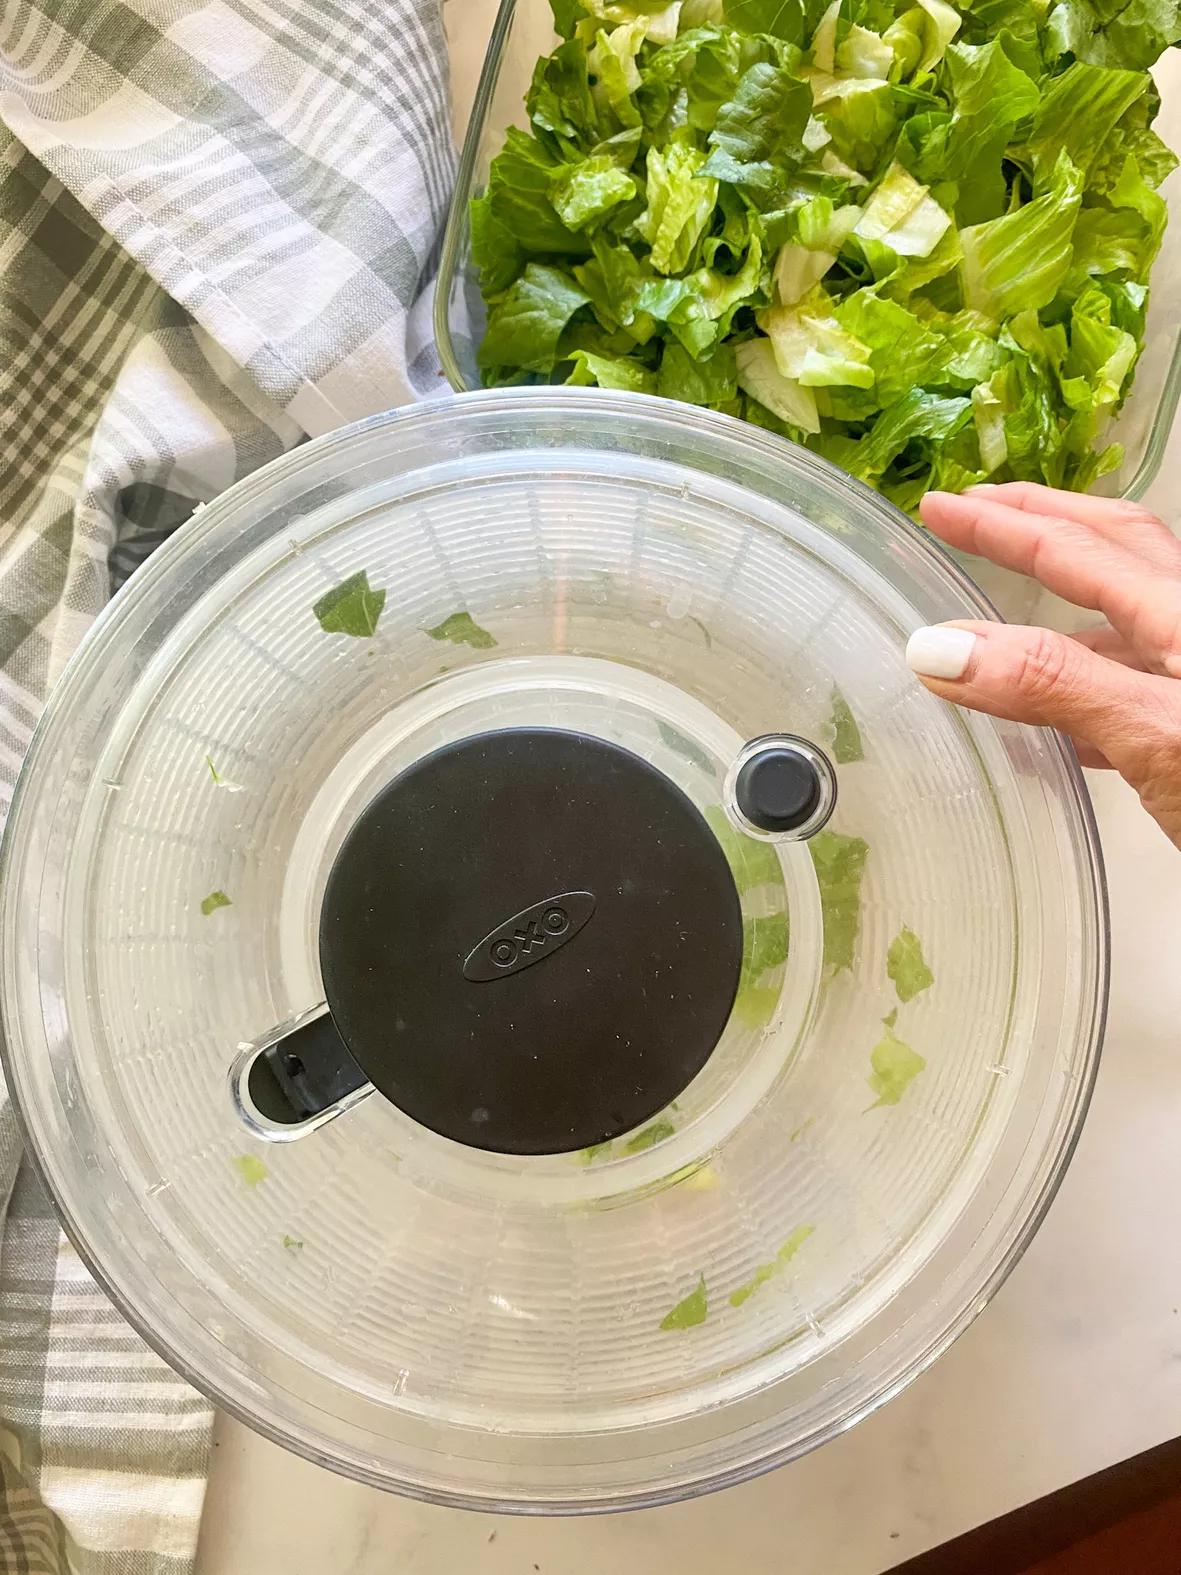 I Tried the OXO Good Grips Salad Spinner: Here's My Review